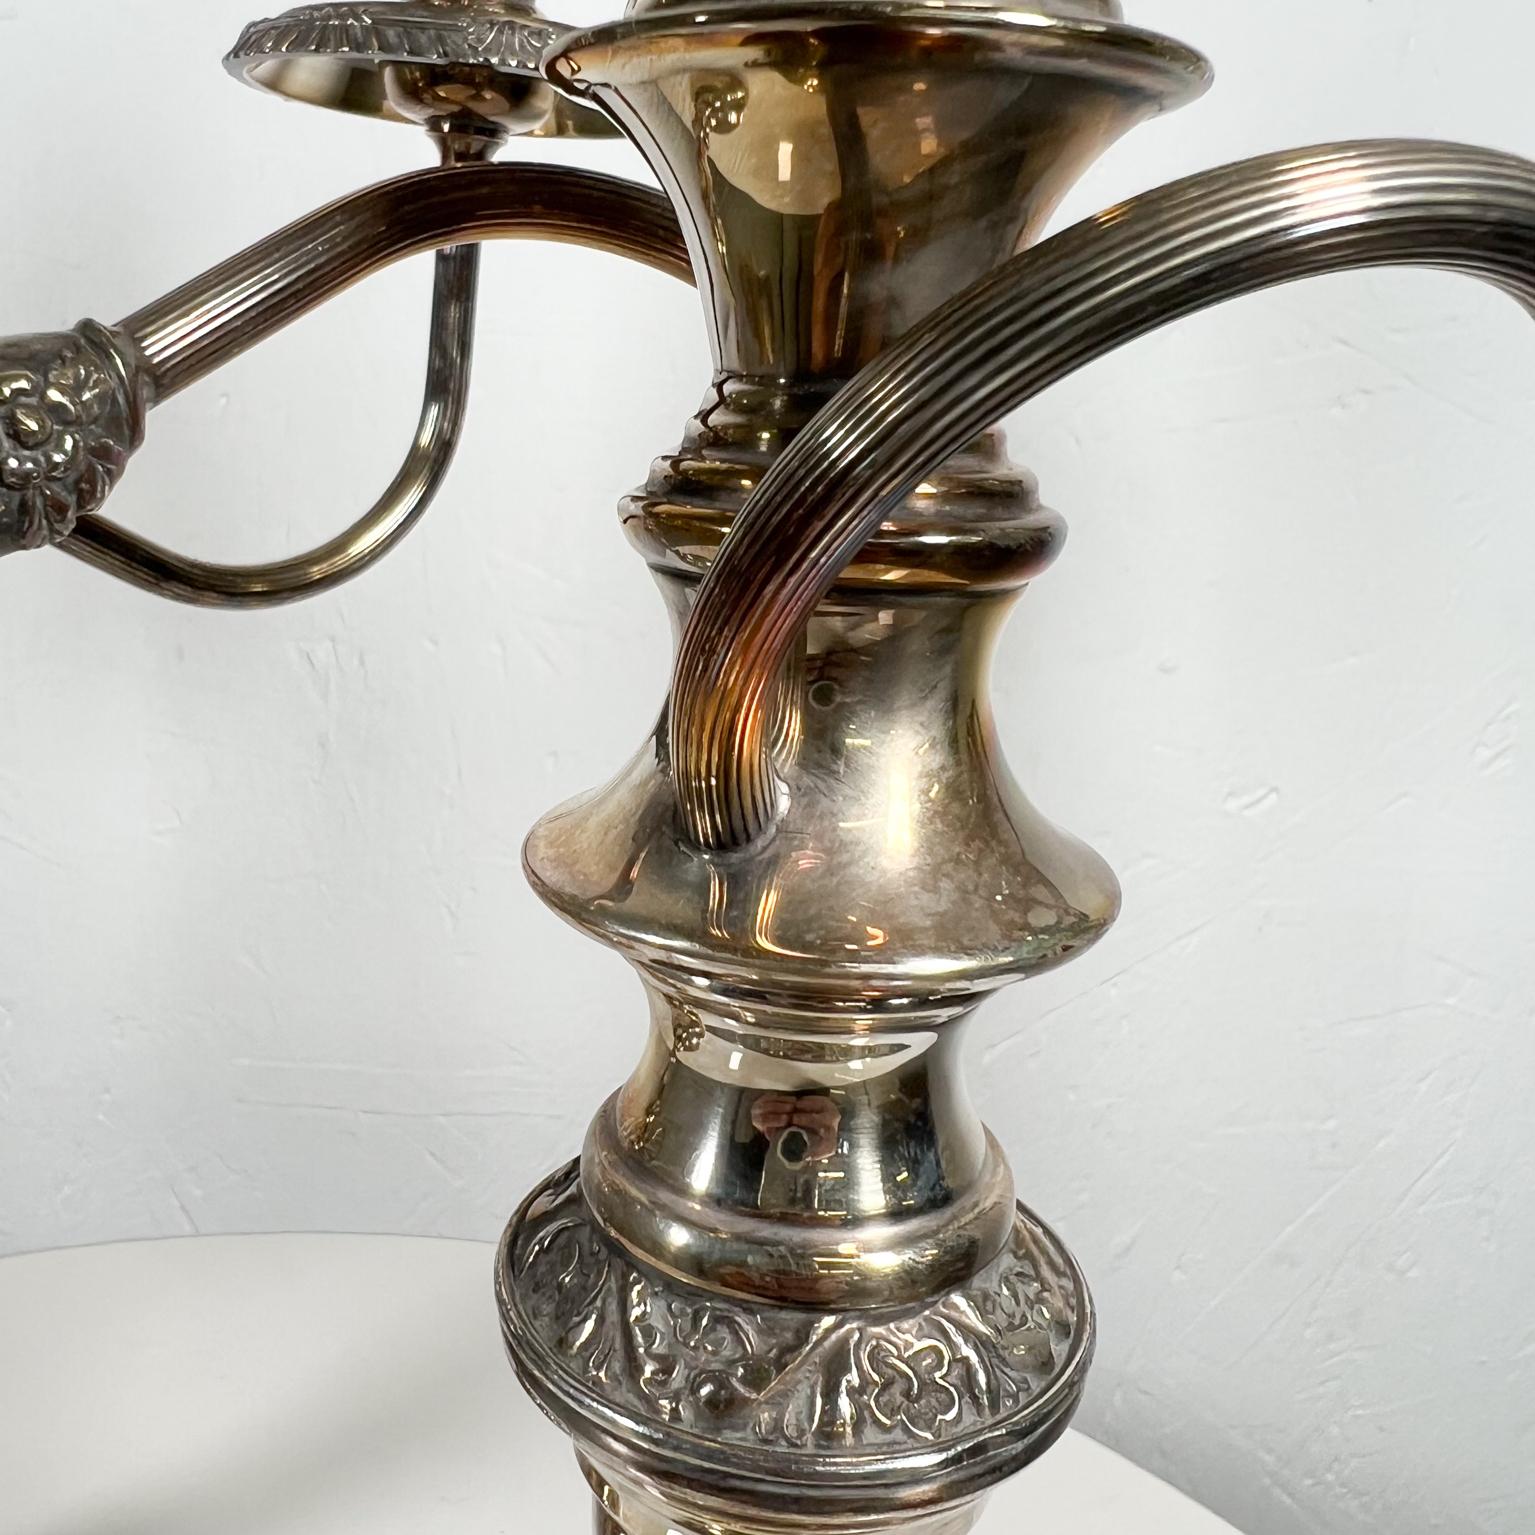 American 1940s Pair of Silverplate Candelabras by Goldfeder Silver Company New York